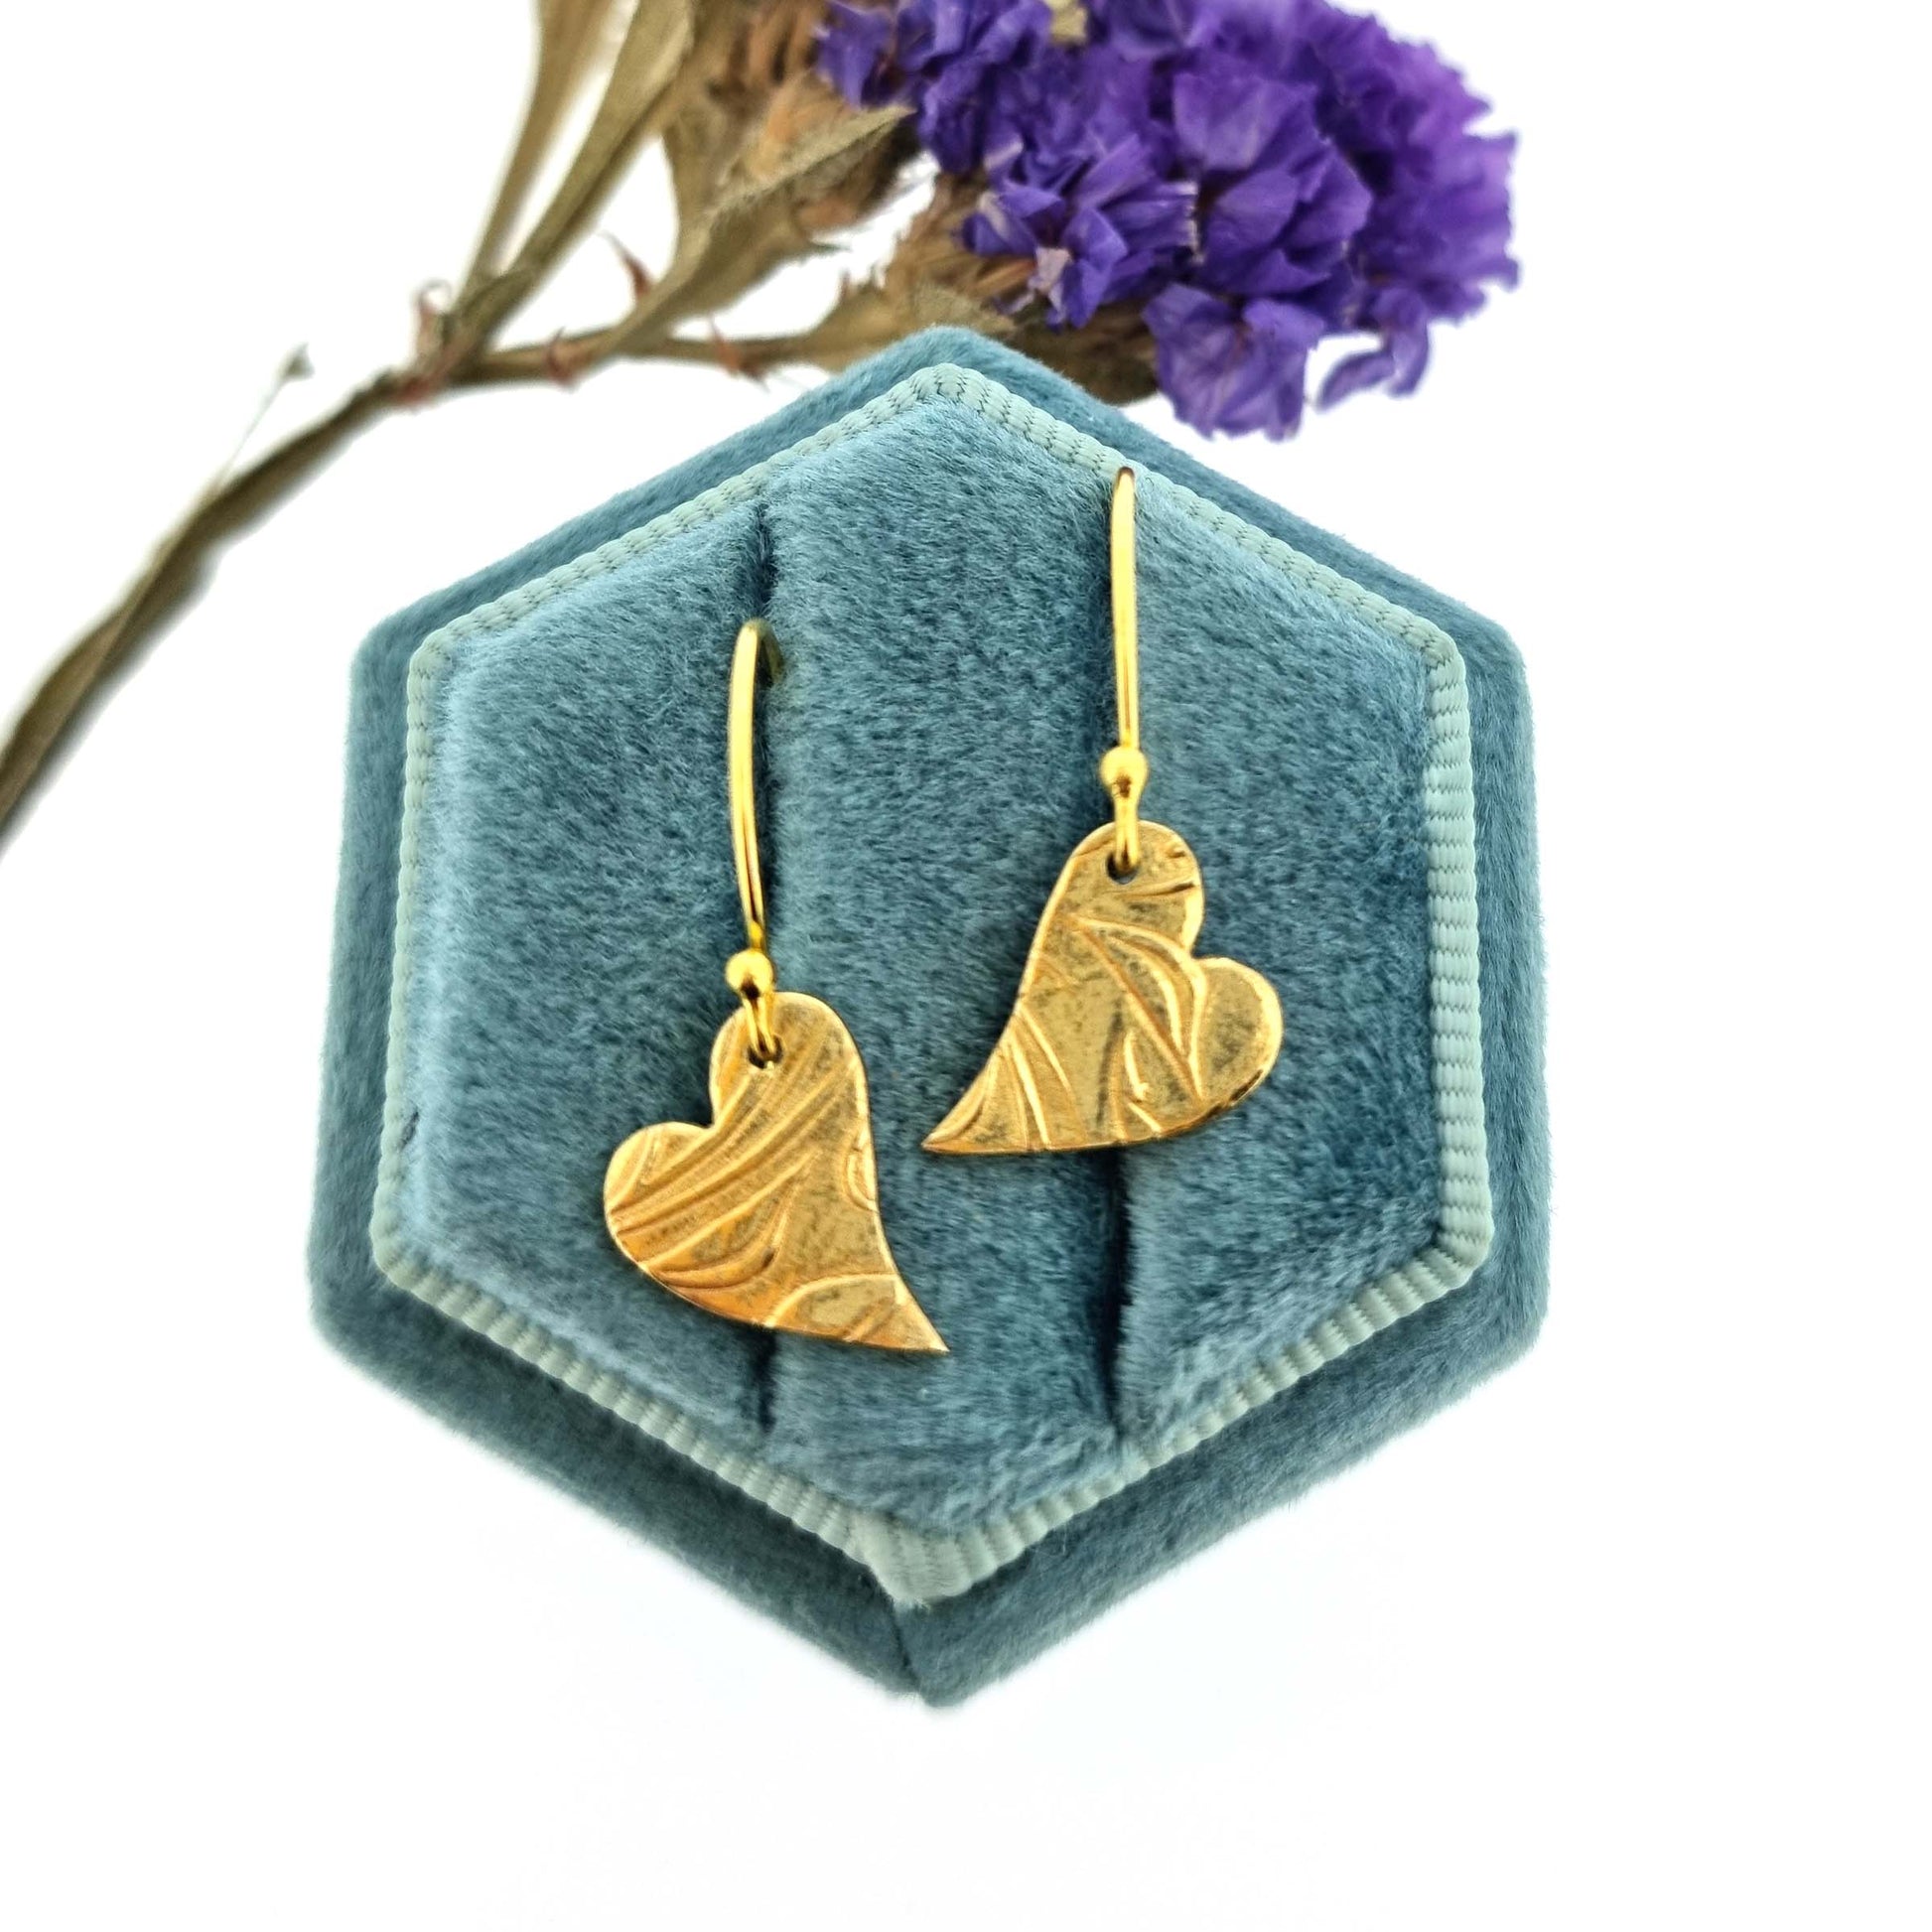 Yellow gold vermeil drop earrings featuring an asymmetrical heart with a leaf vine pattern suspended from an ear wire. Pictured in a jewellery box with flowers.